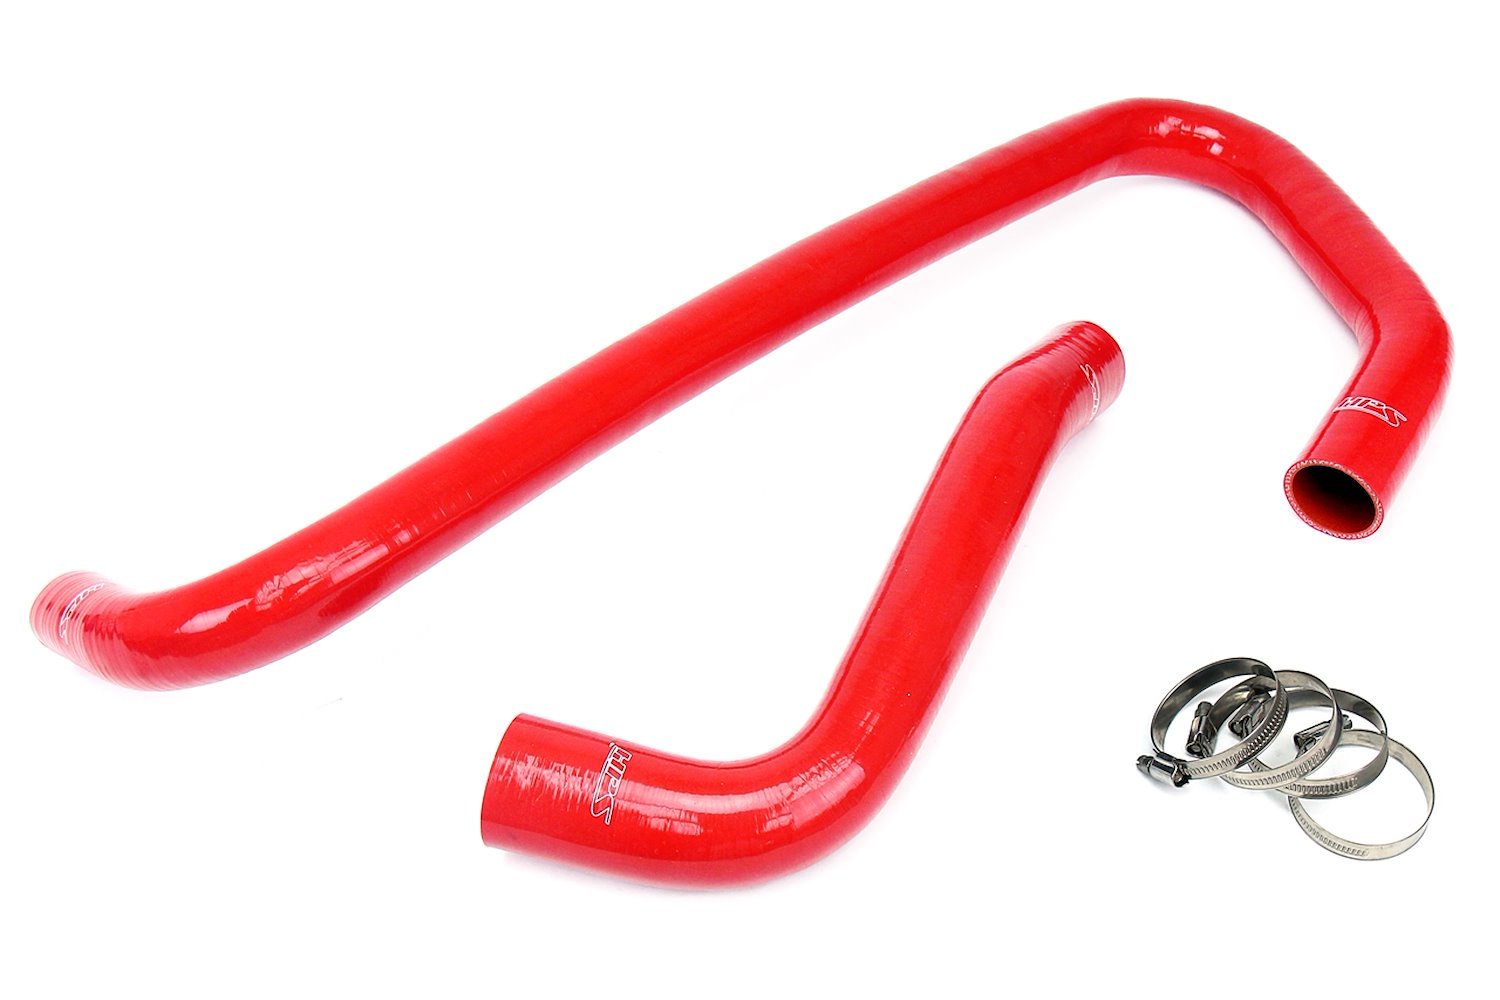 57-1307-RED Radiator Hose Kit, High-Temp 3-Ply Reinforced Silicone, Replace OEM Rubber Radiator Coolant Hoses